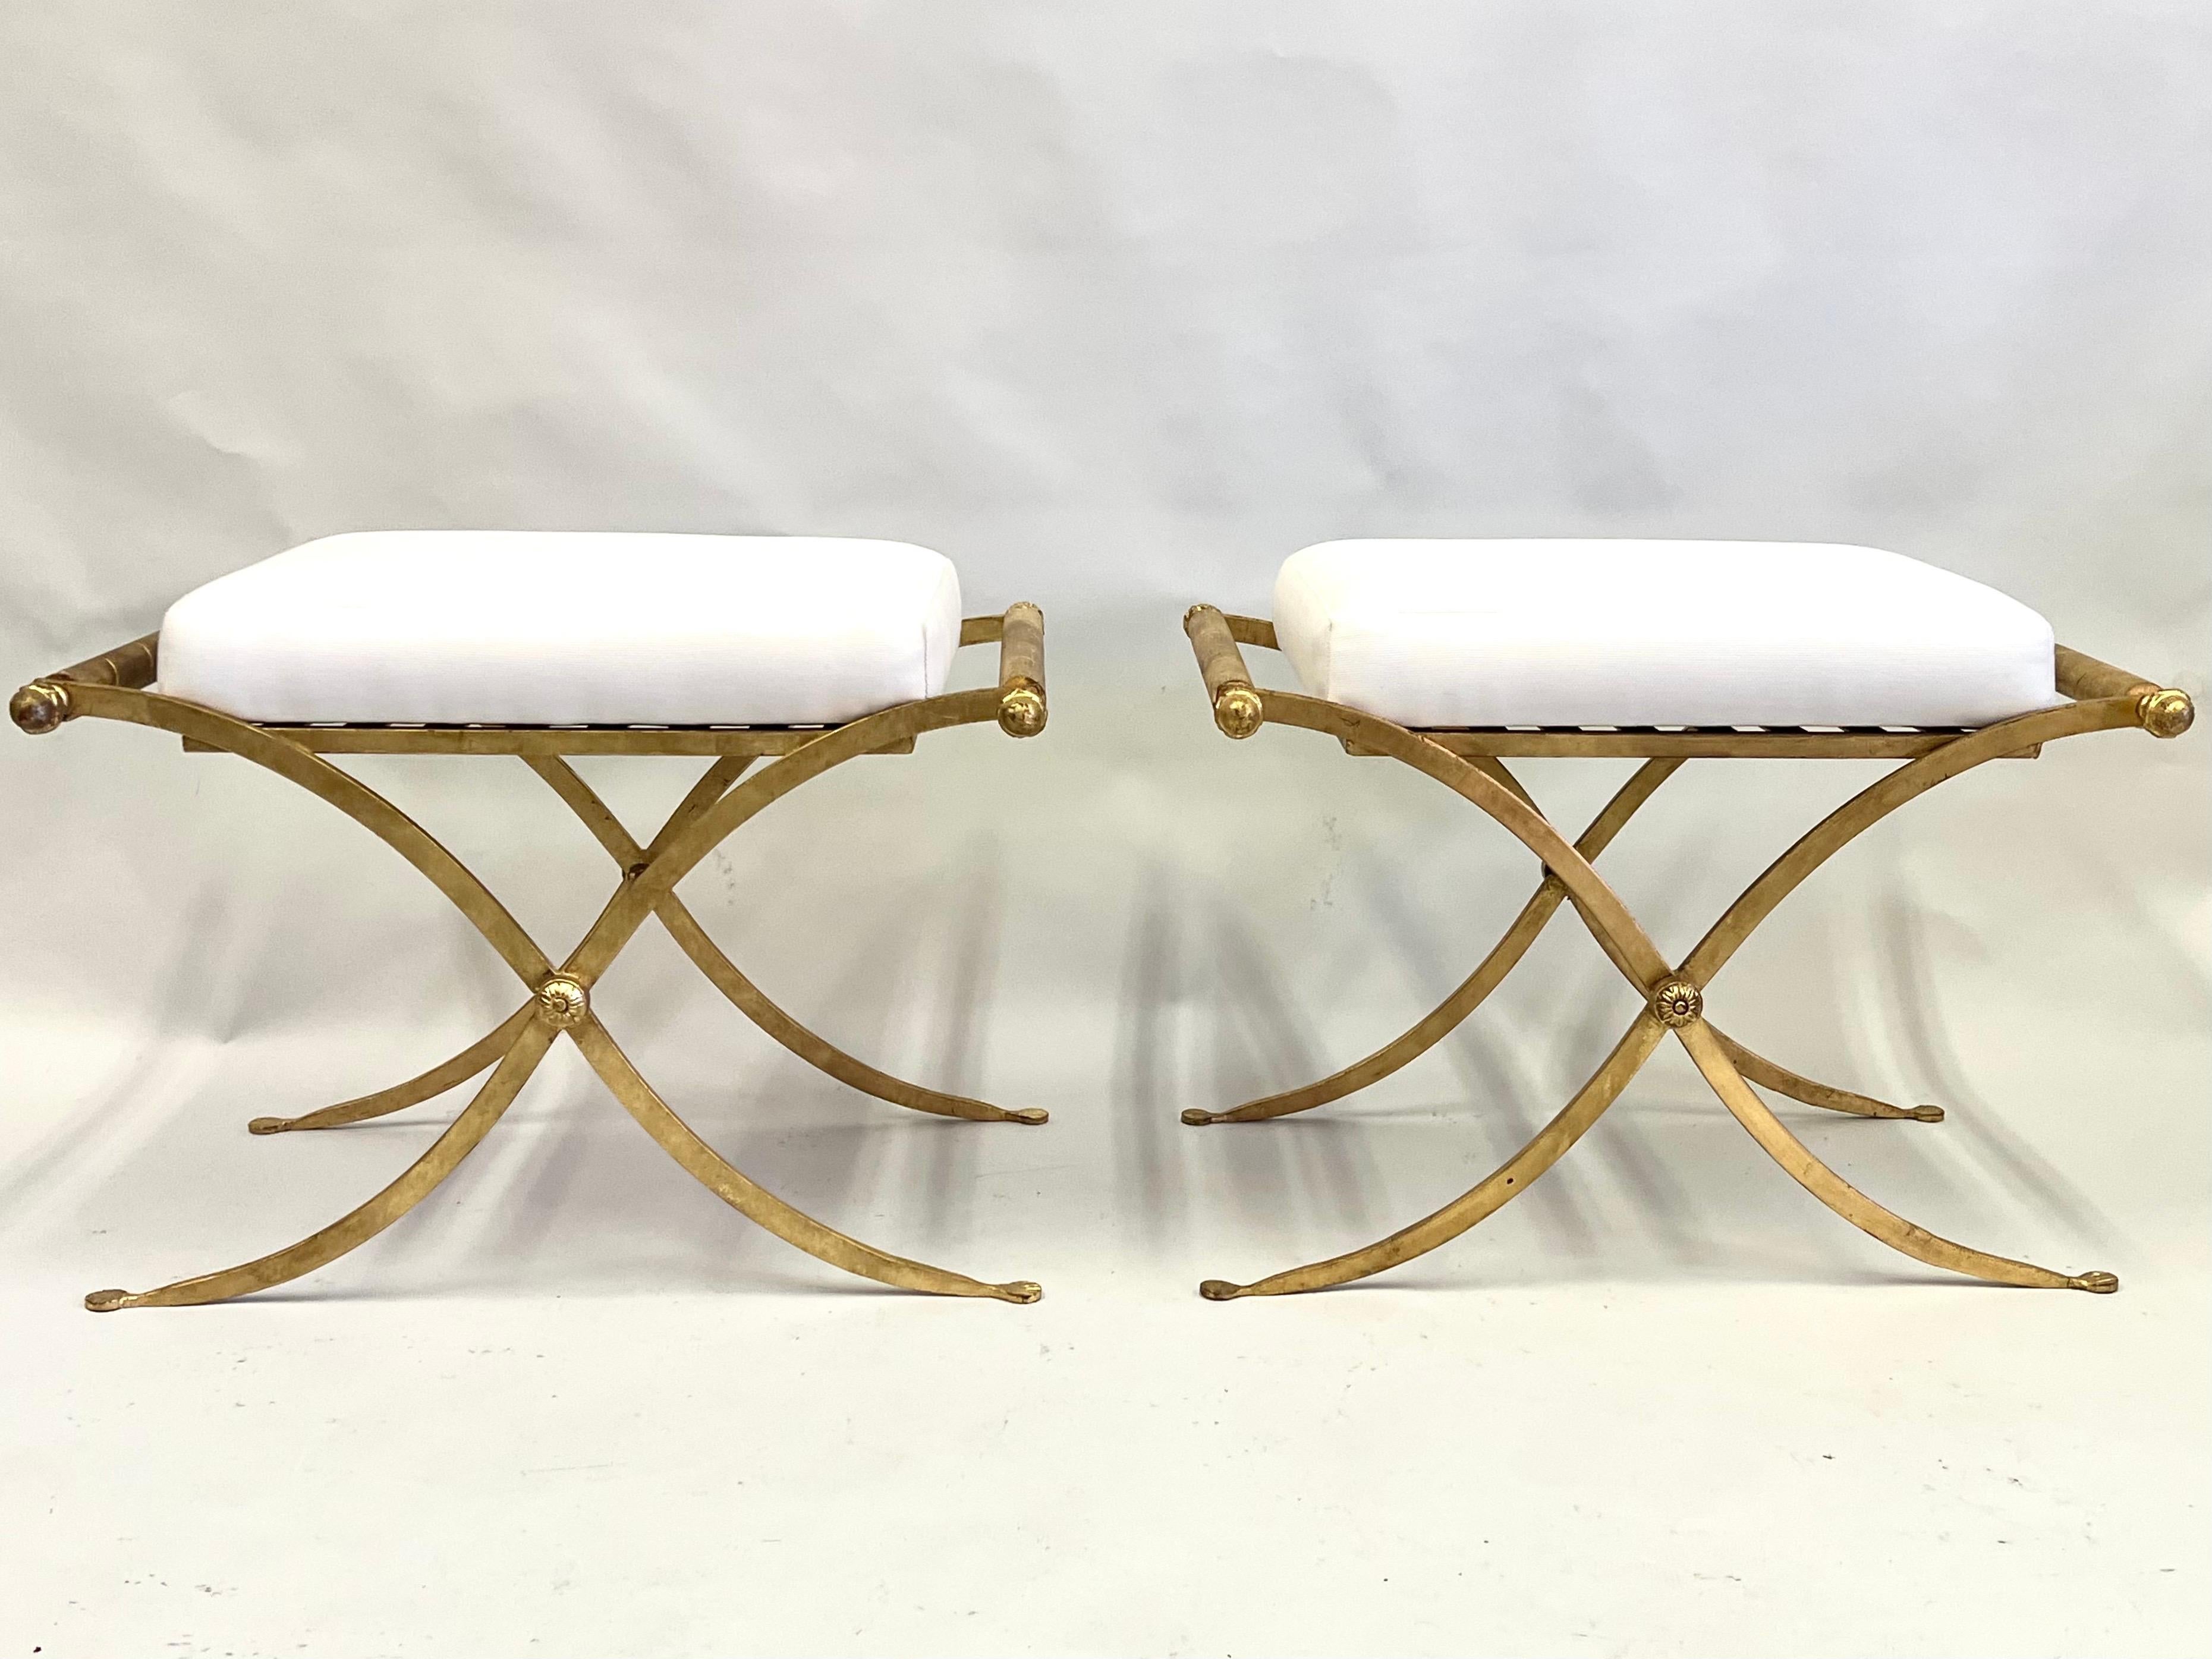 20th Century Pair of French Midcentury Modern Neoclassical Gilt Iron Benches, Raymond Subes